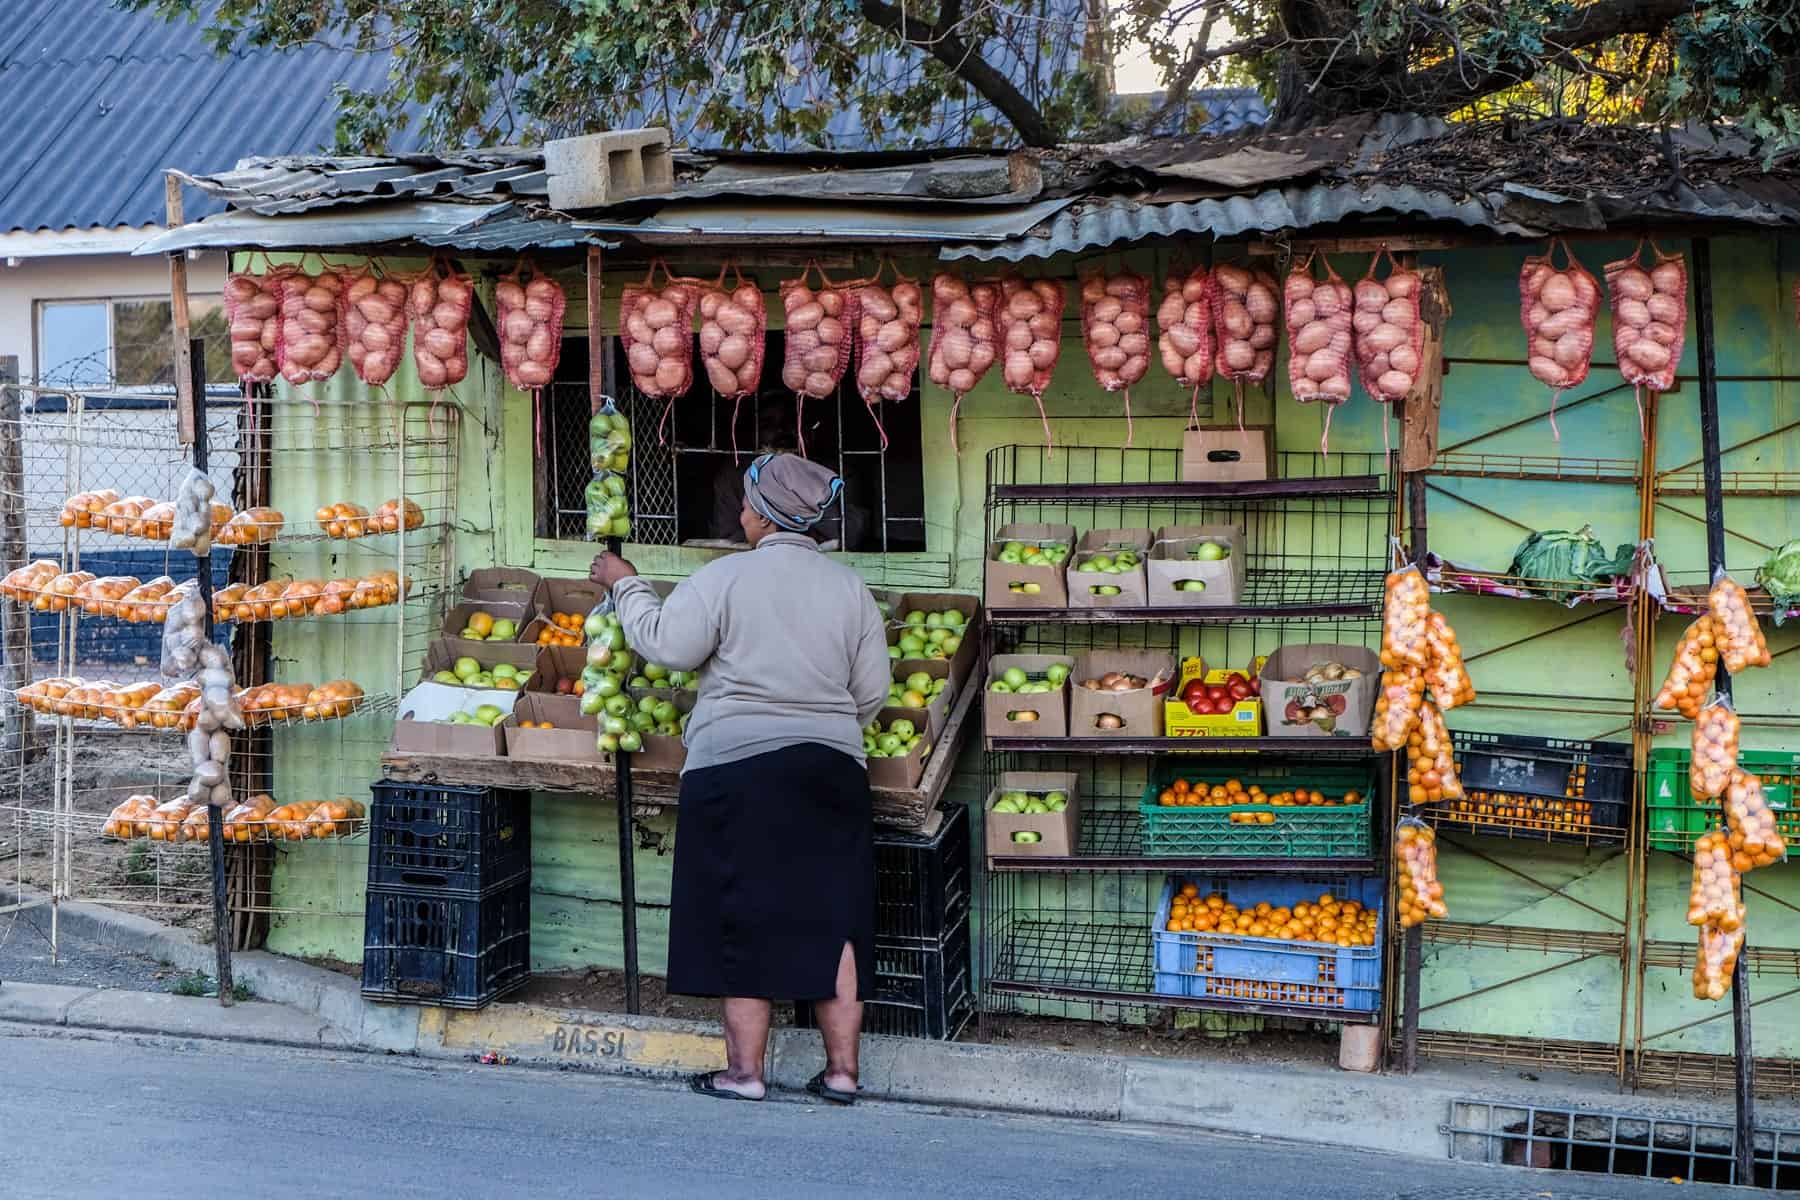 A woman in a grey top and black skirt looks at bags of apples on a fruit and vegetable stall with green walls and hanging bags of potatoes in a township in South Africa